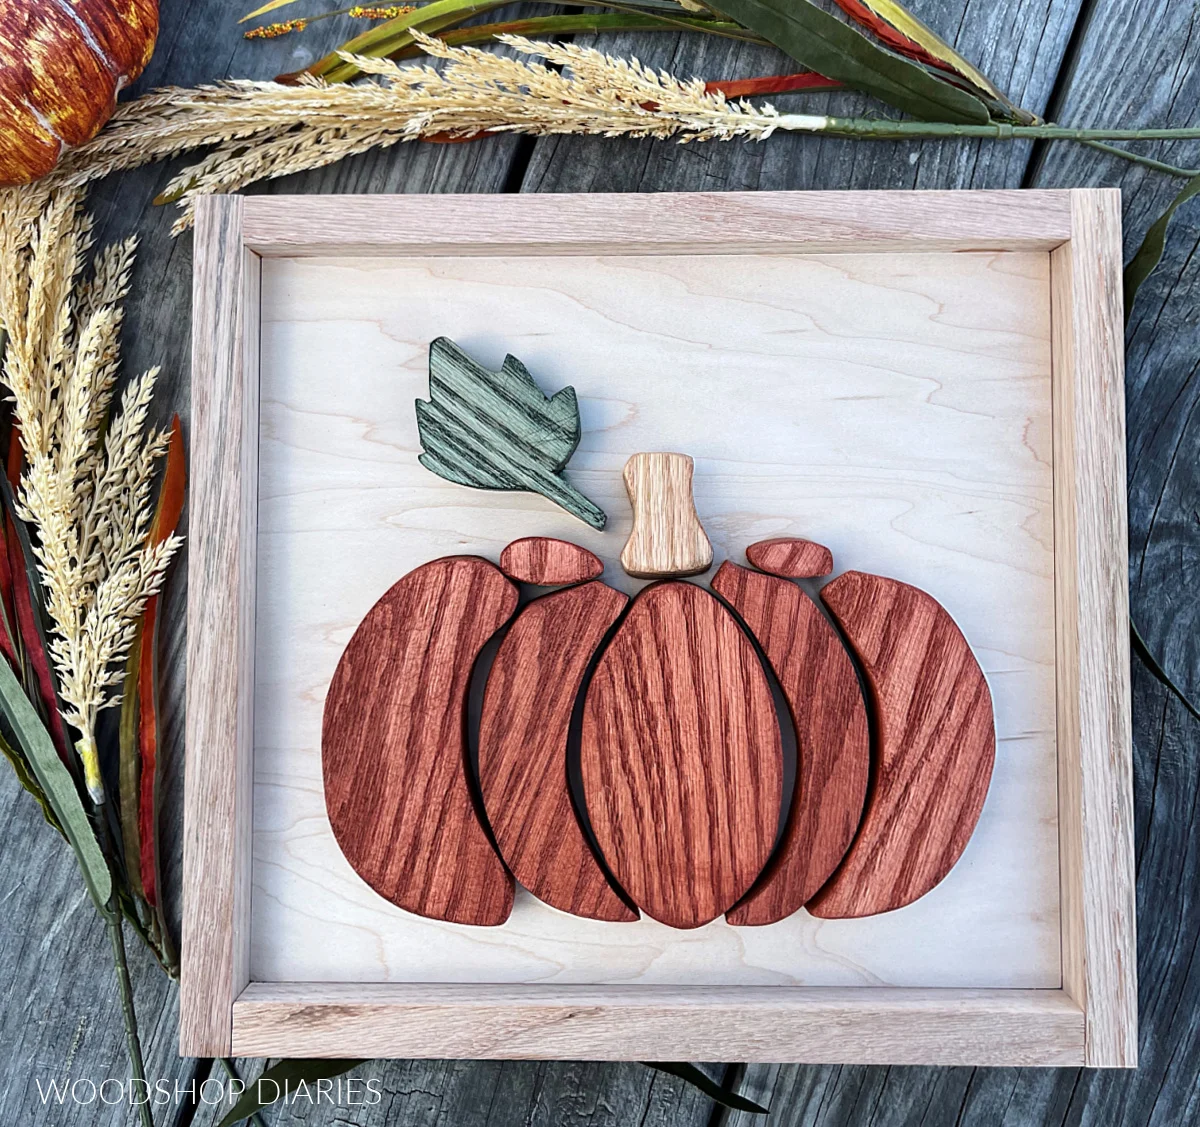 Wood pumpkin sign from Woodshop Diaries. 